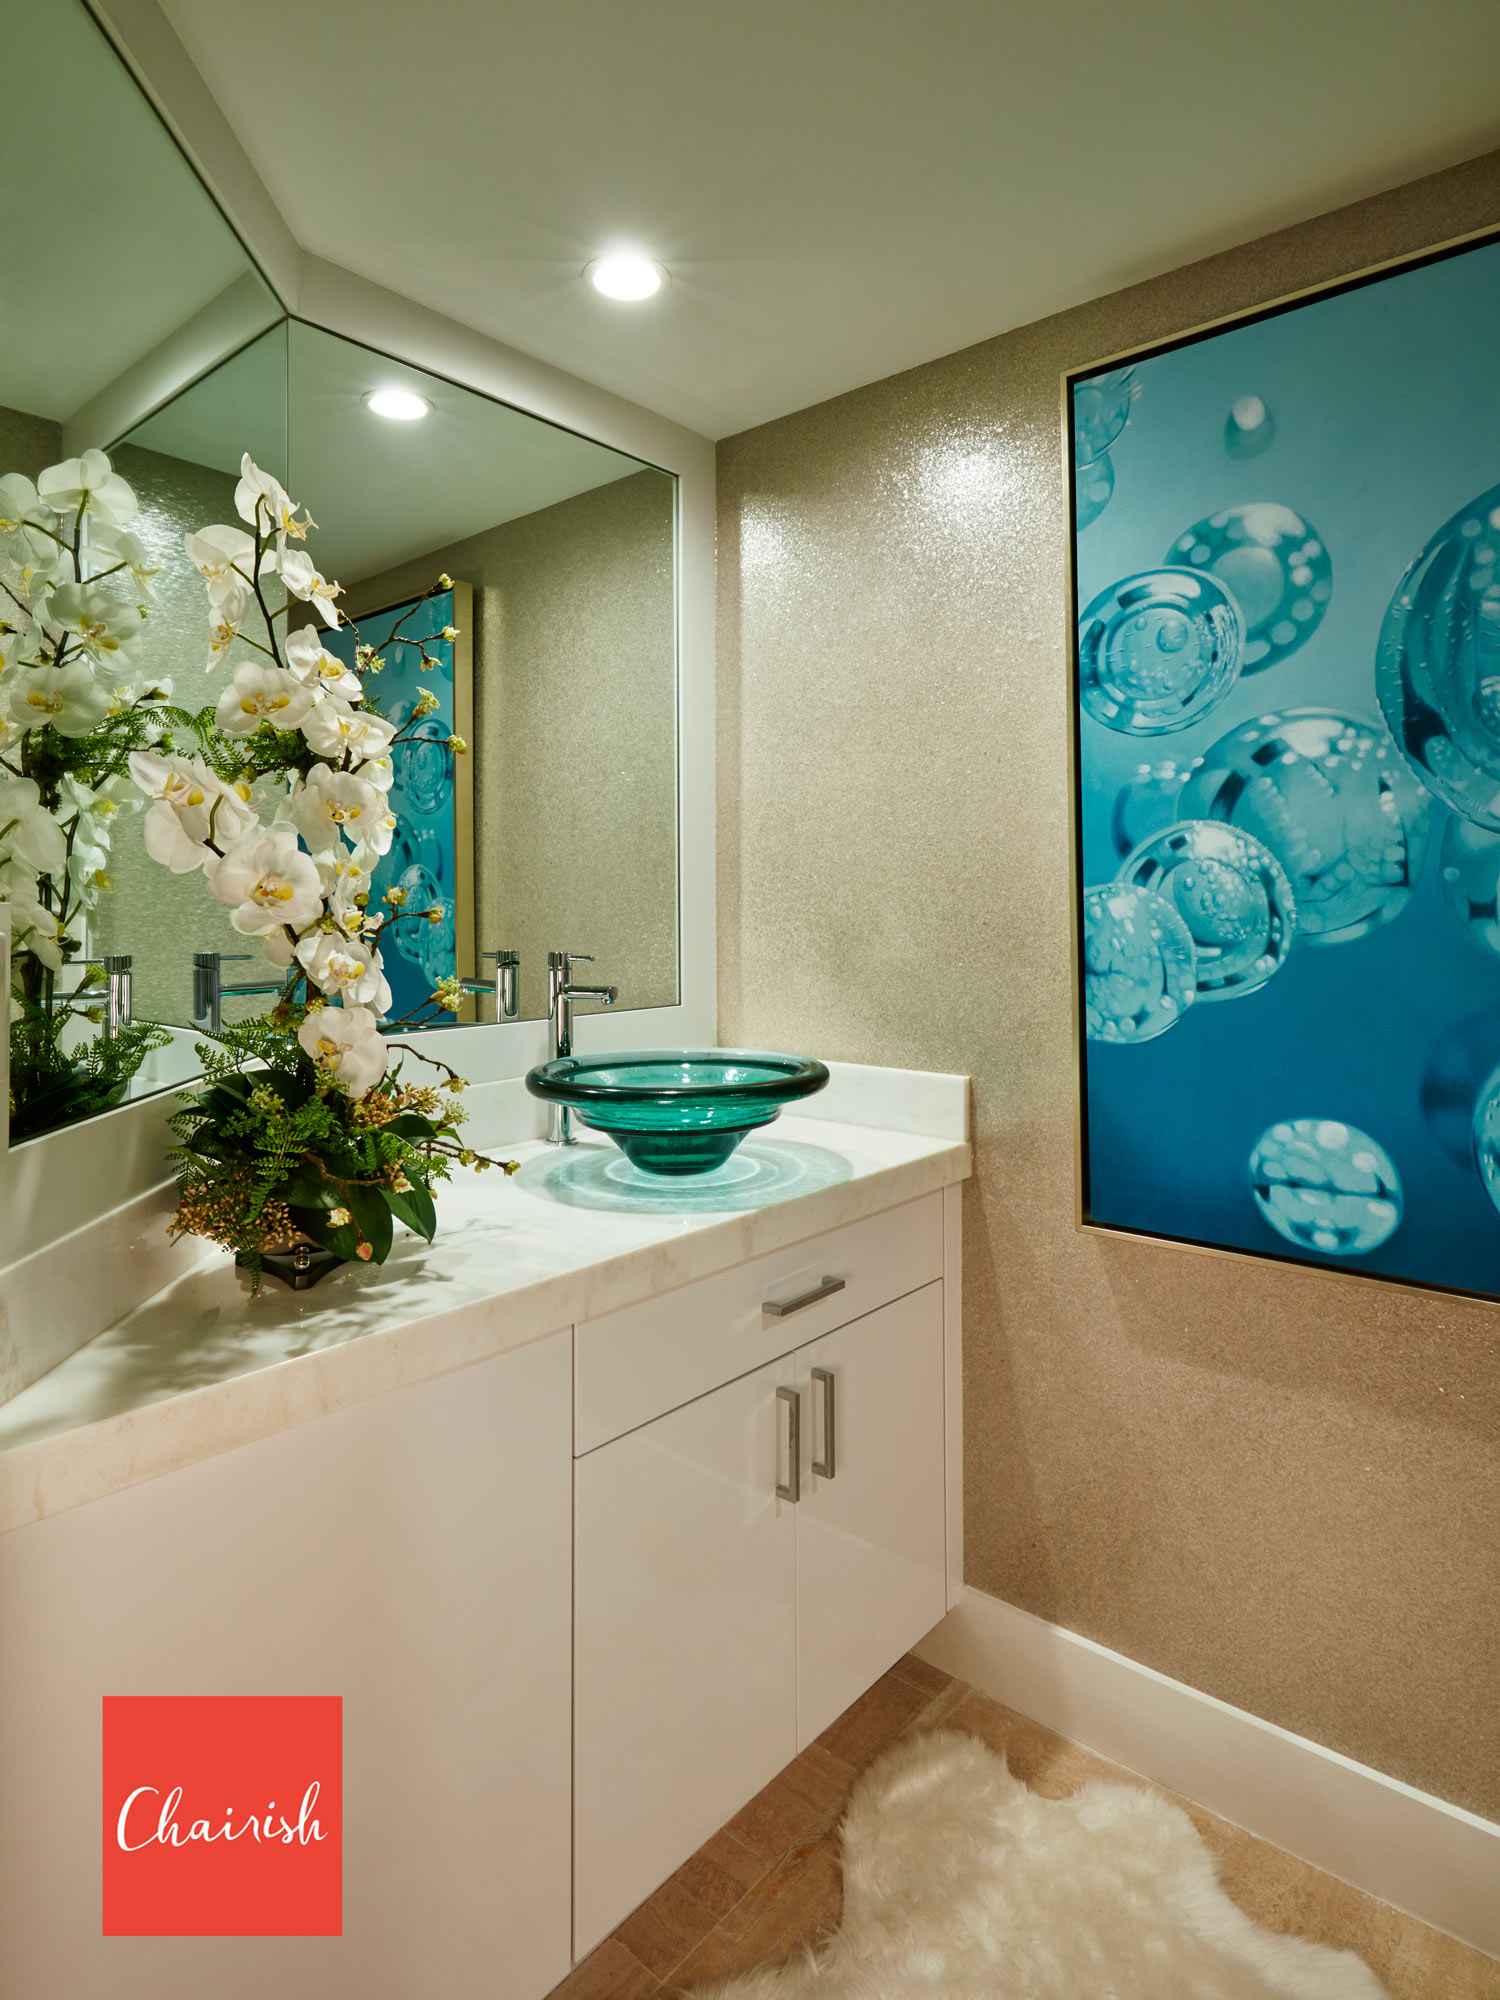 Chairish Feature - Do's and Don'ts for Decorating Your Powder Room